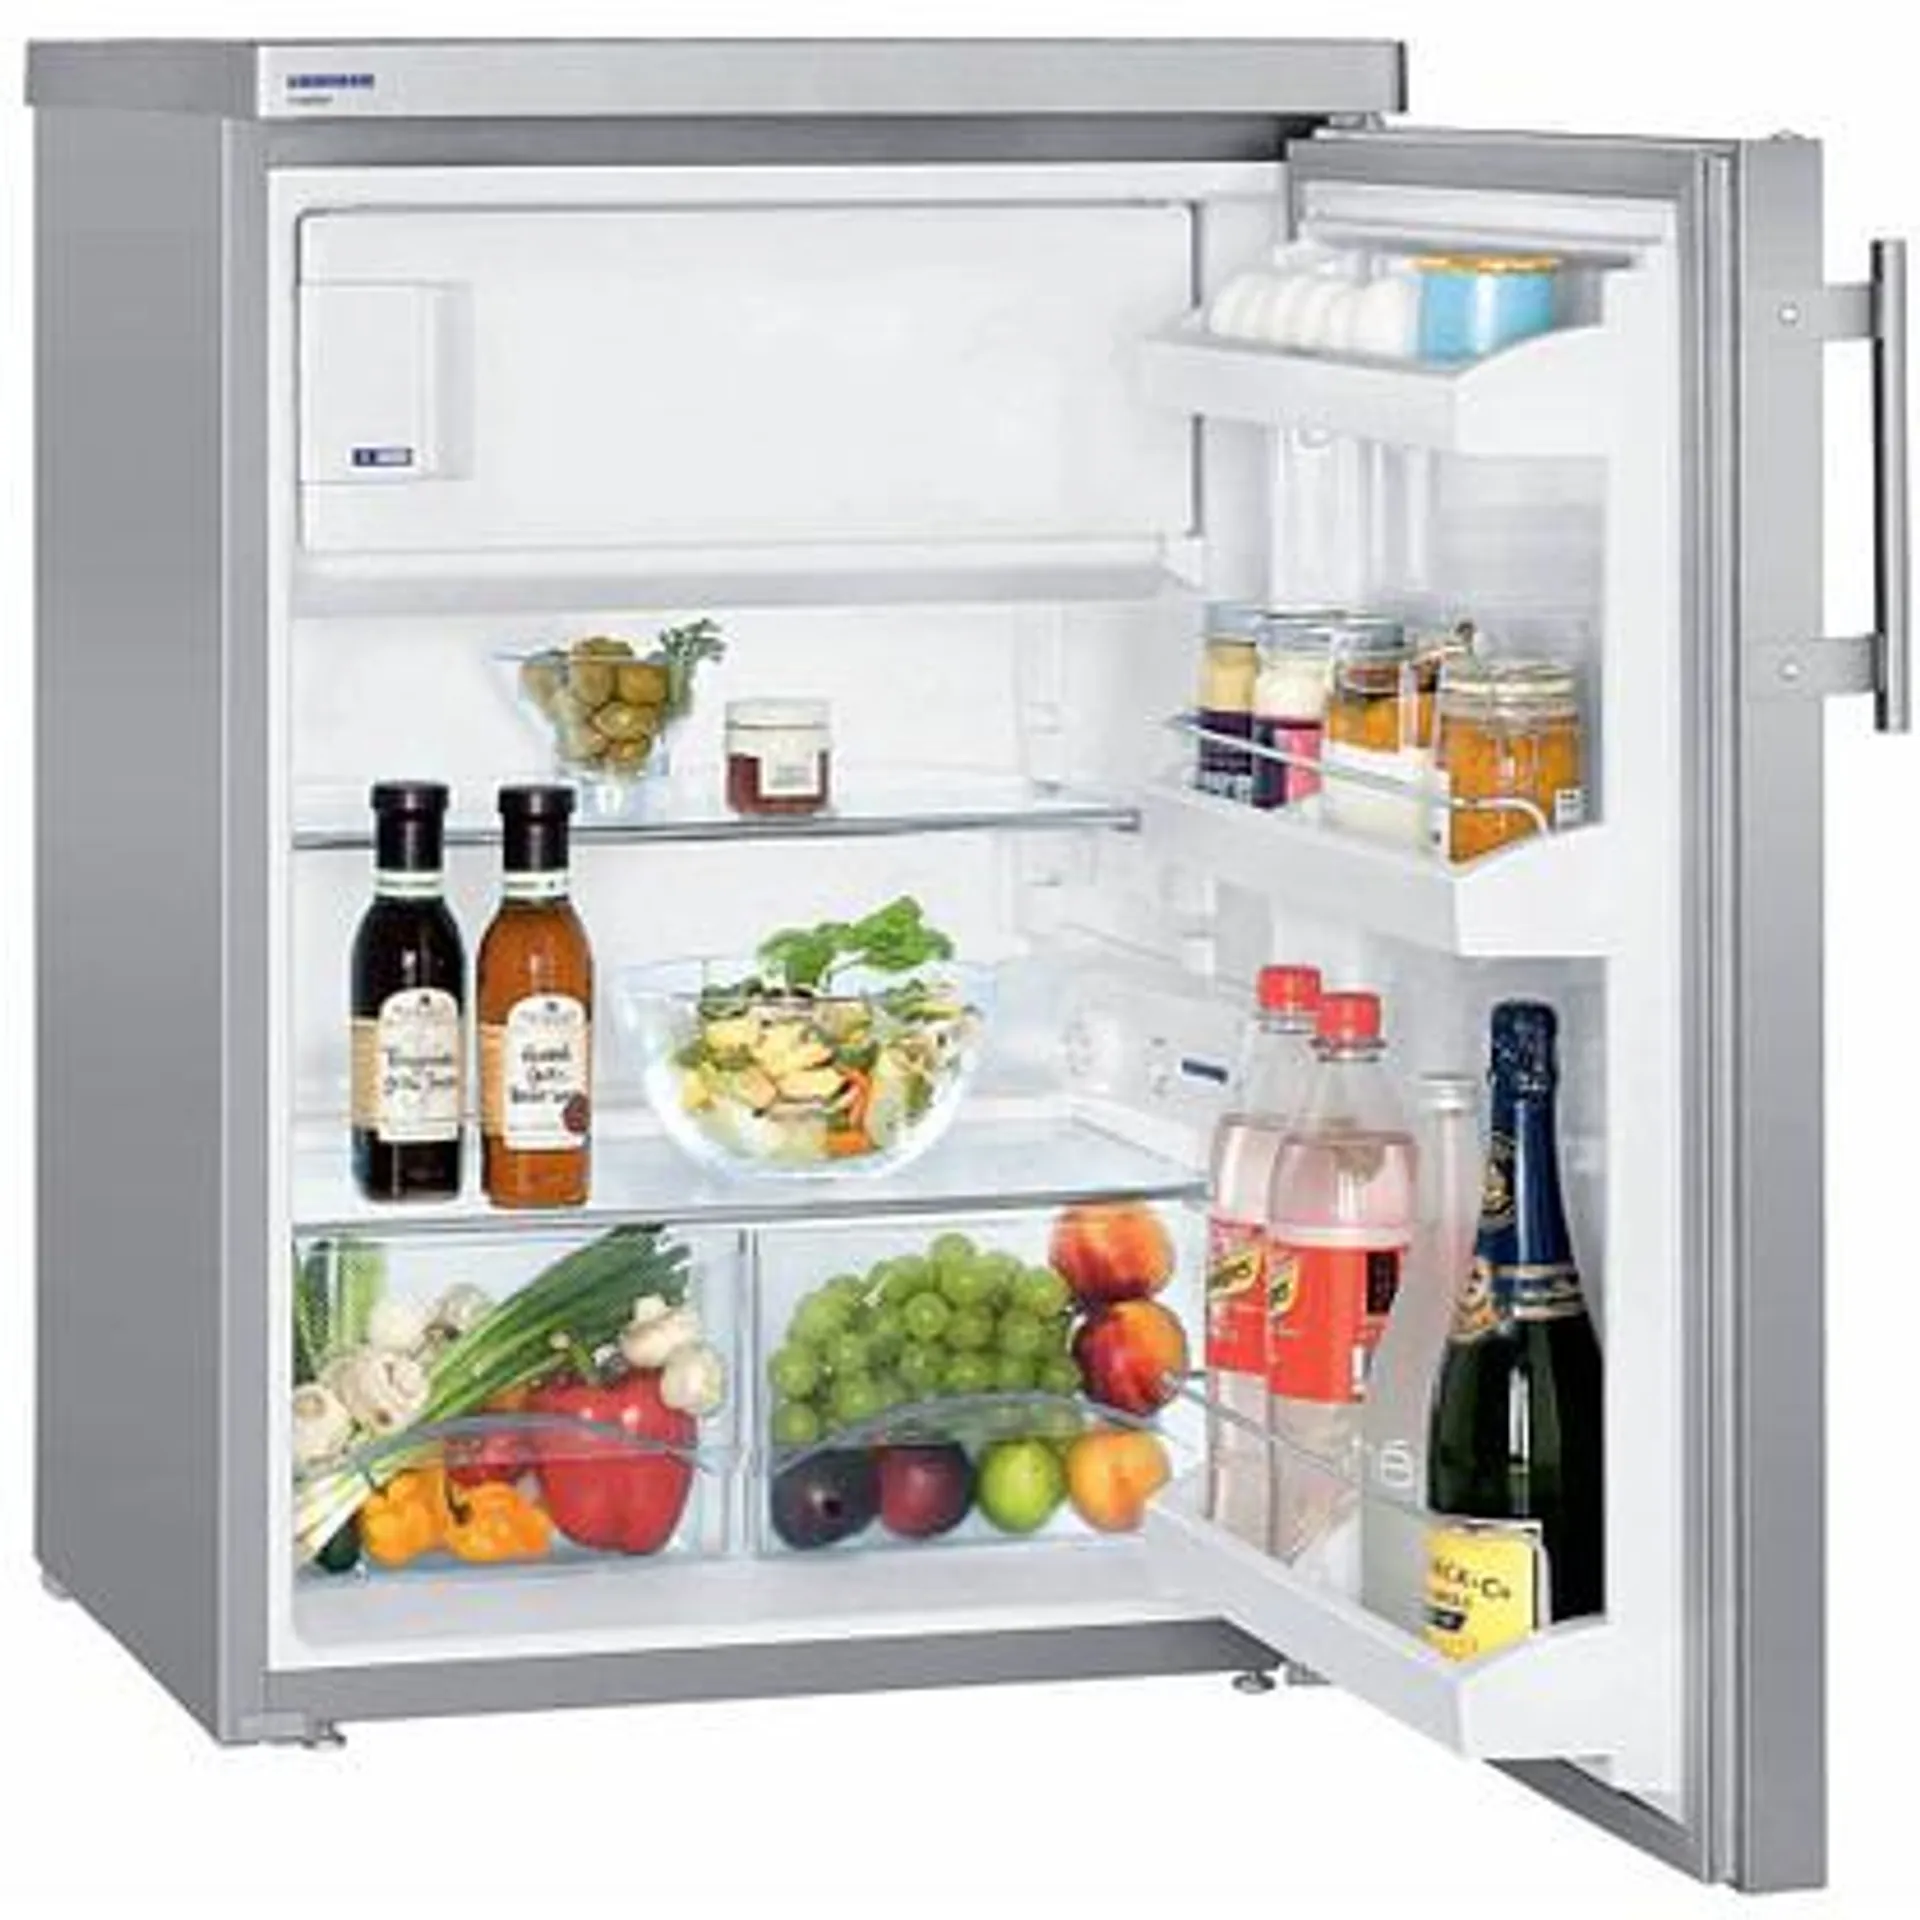 Liebherr TPESF1714 60cm Freestanding Undercounter Fridge With Ice Box – STAINLESS STEEL